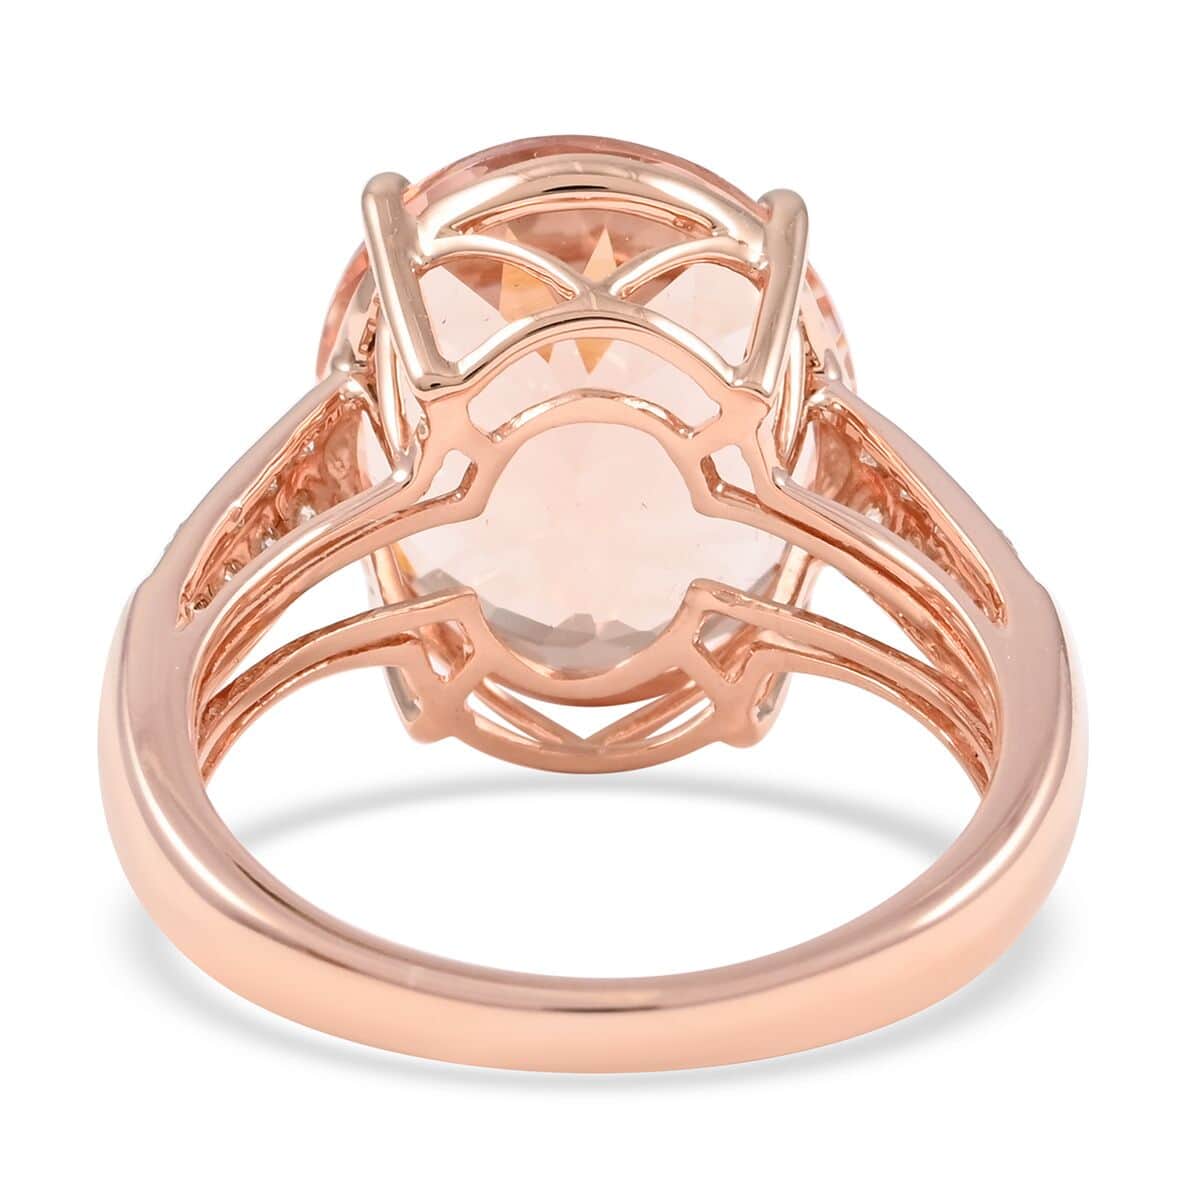 Certified & Appraised LUXORO 14K Rose Gold AAA Marropino Morganite and G-H I1 Diamond Ring 3.35 Grams 6.85 ctw image number 4